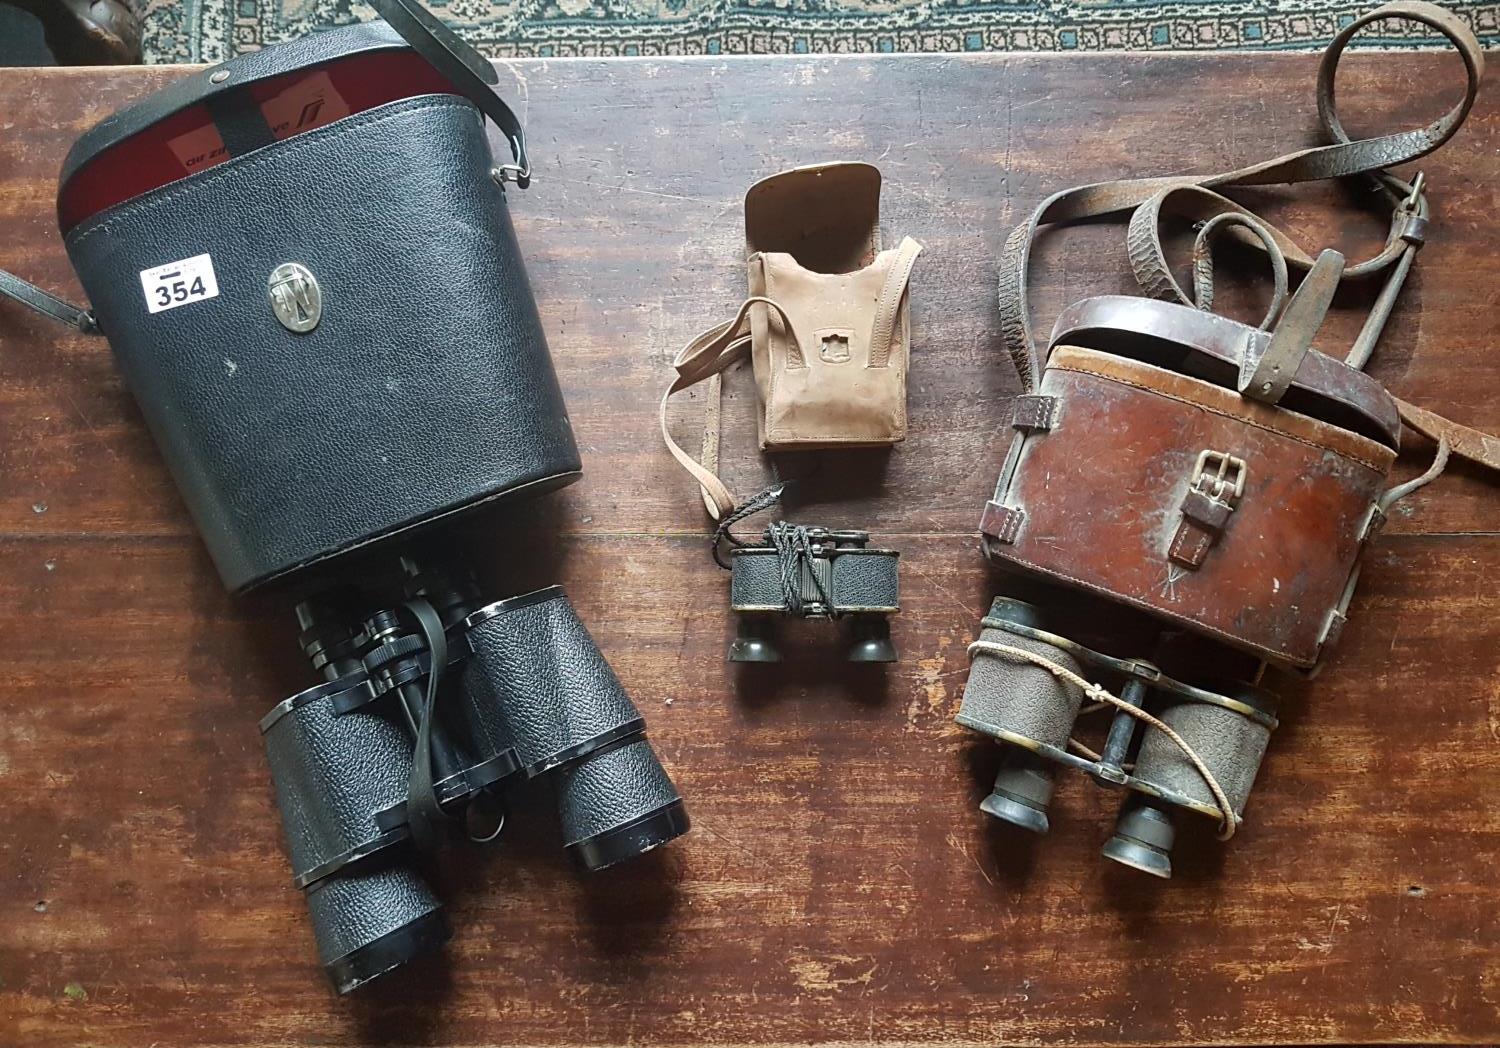 A pair of Sonam Binoculars along with a pair of opera glasses. - Image 2 of 2